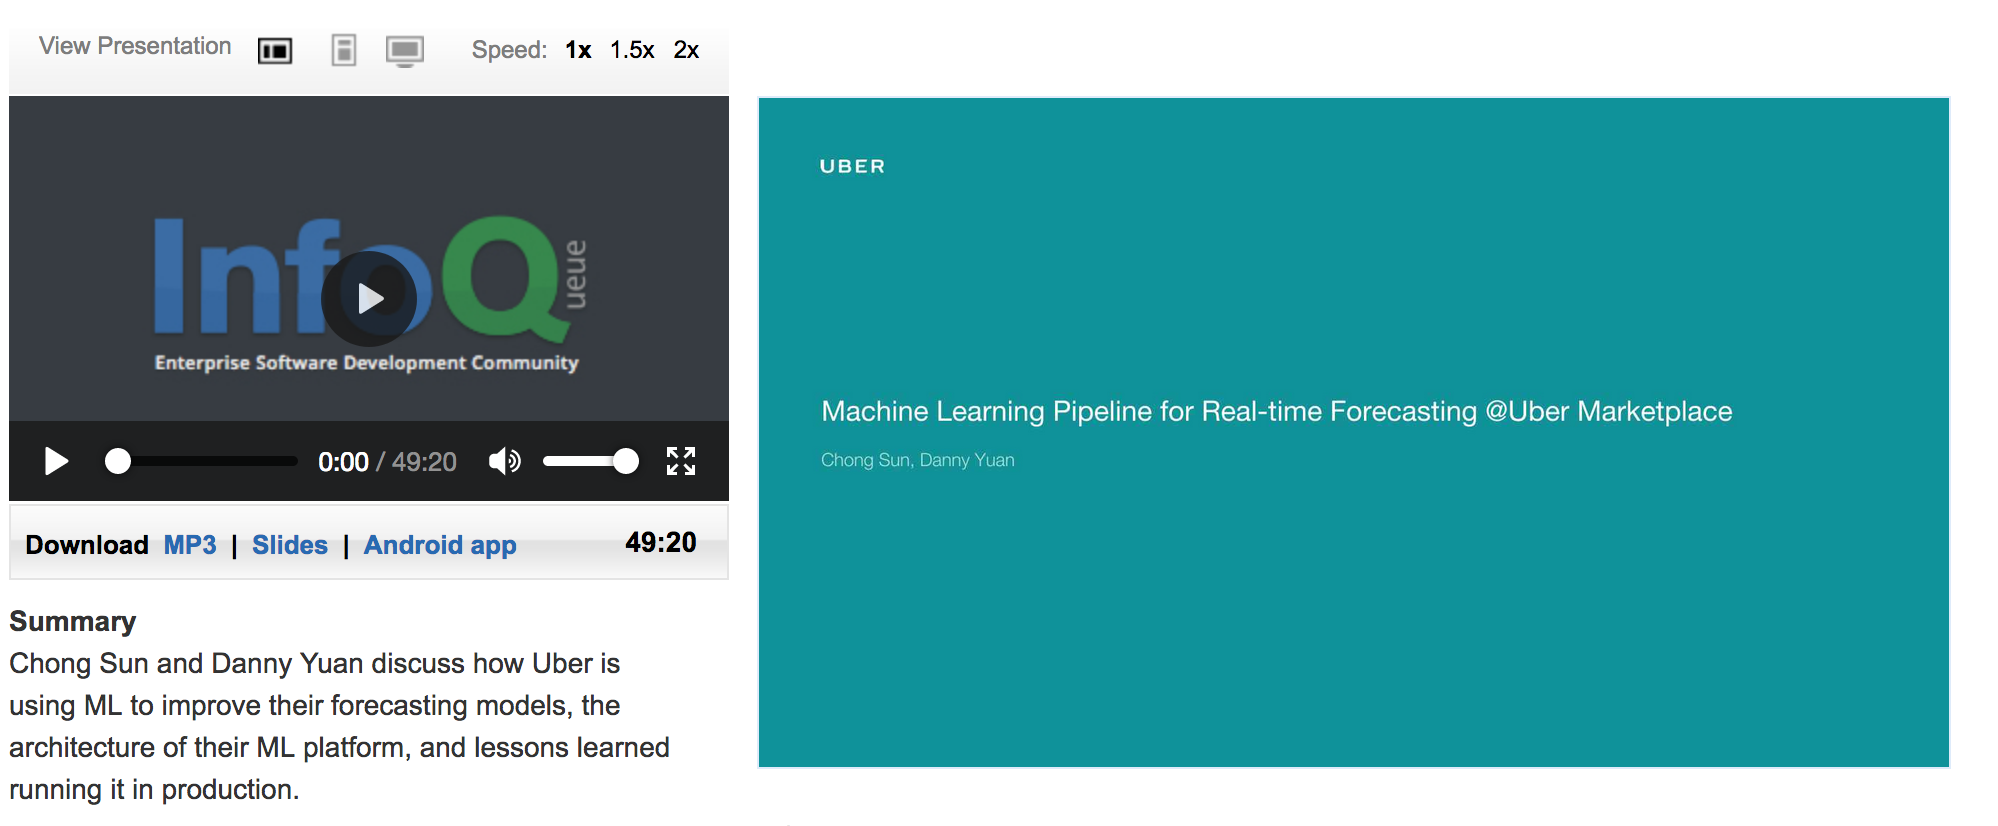 Machine Learning Pipeline for Real-Time Forecasting @Uber Marketplace